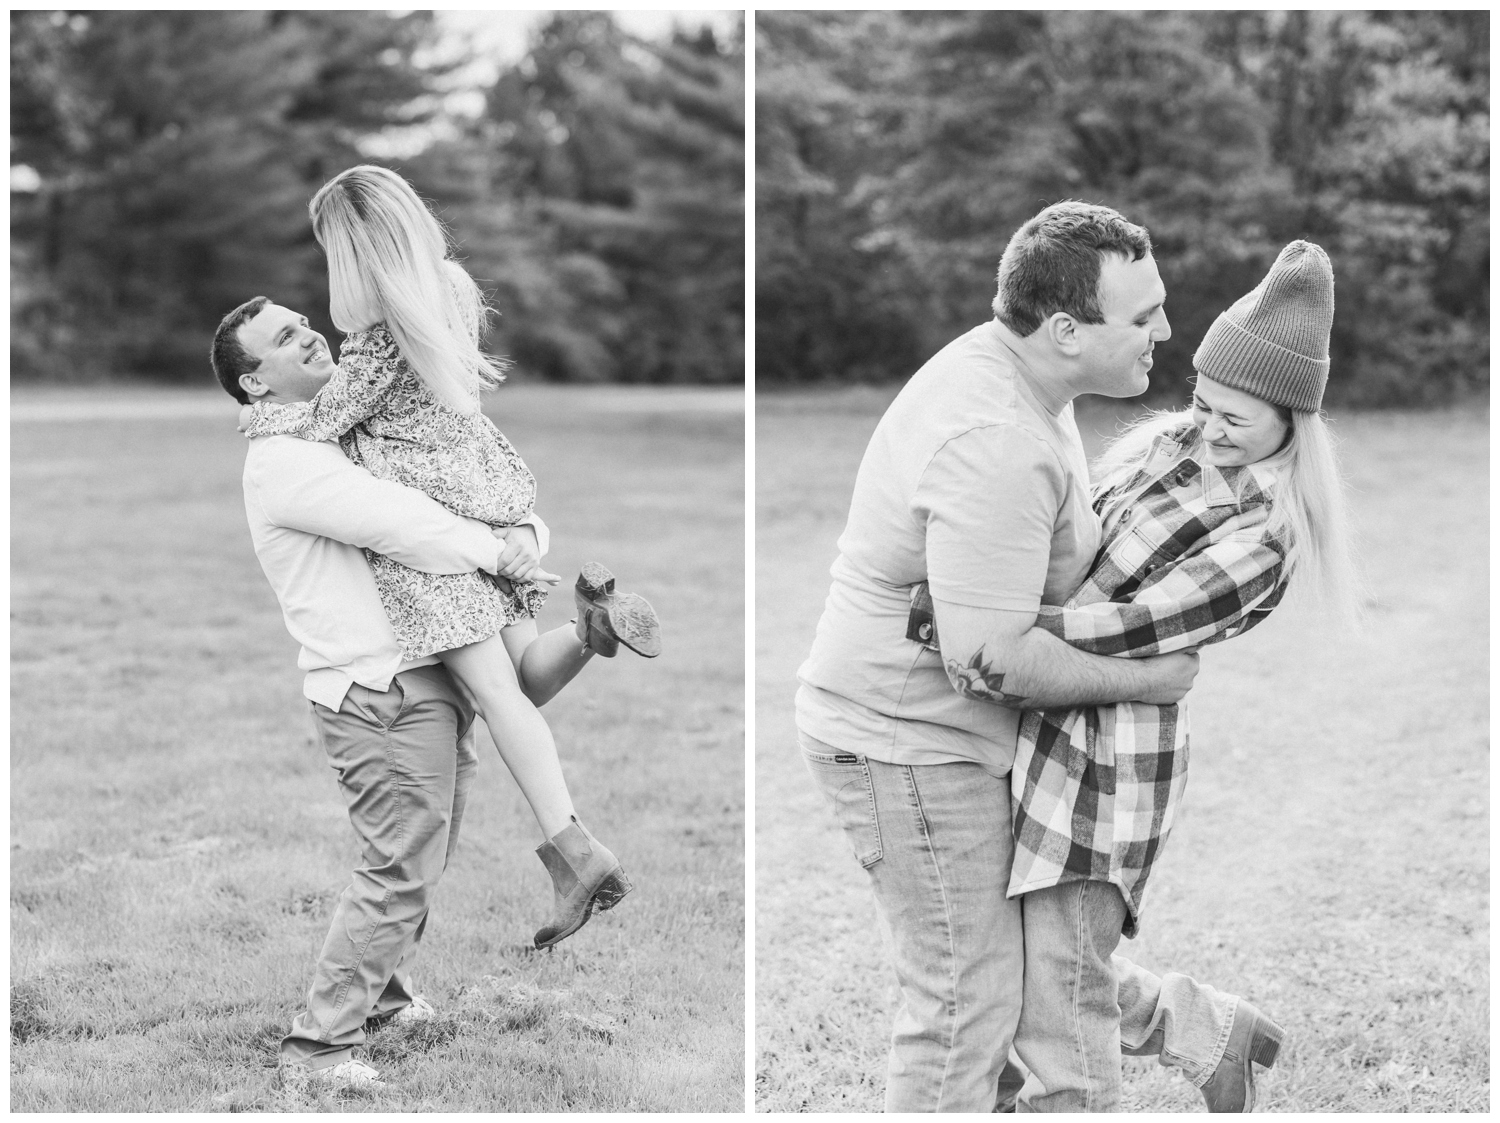 Candid black and white photographs of a man and women who are celebrating their engagement with photos. This engagement session took place in a park in Ballston Spa, NY near Malta.